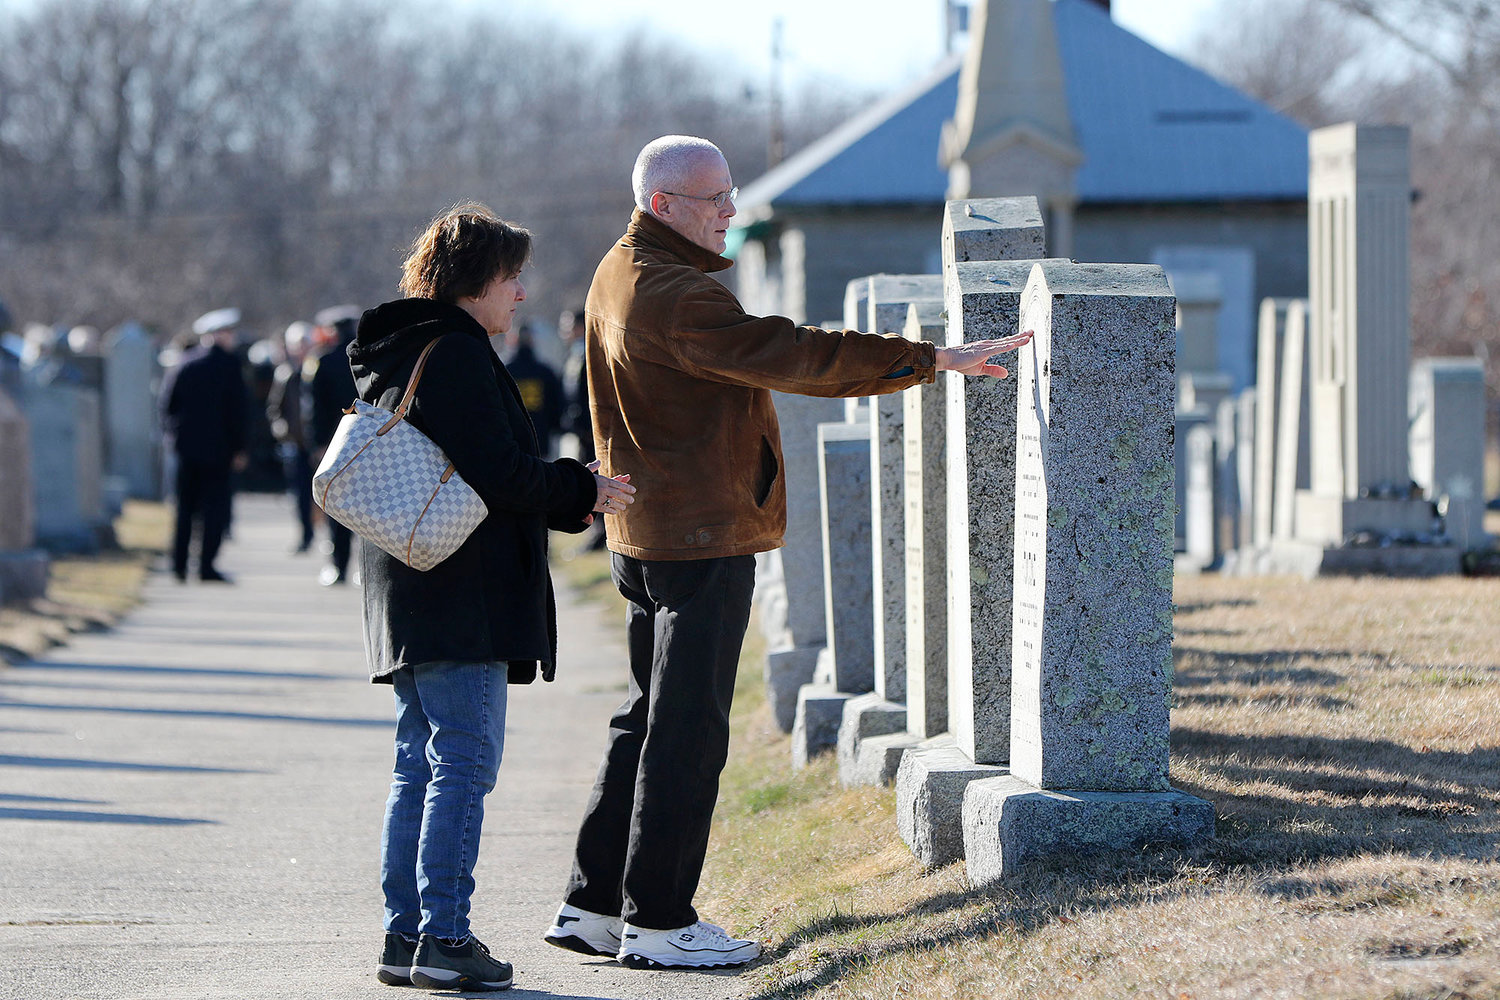 Cathy Horvitz, of Westwood, MA, left, and Ken Rapisa, of Fall River, right, look over the grave stones in the cemetery.   They did not know each other before this day.